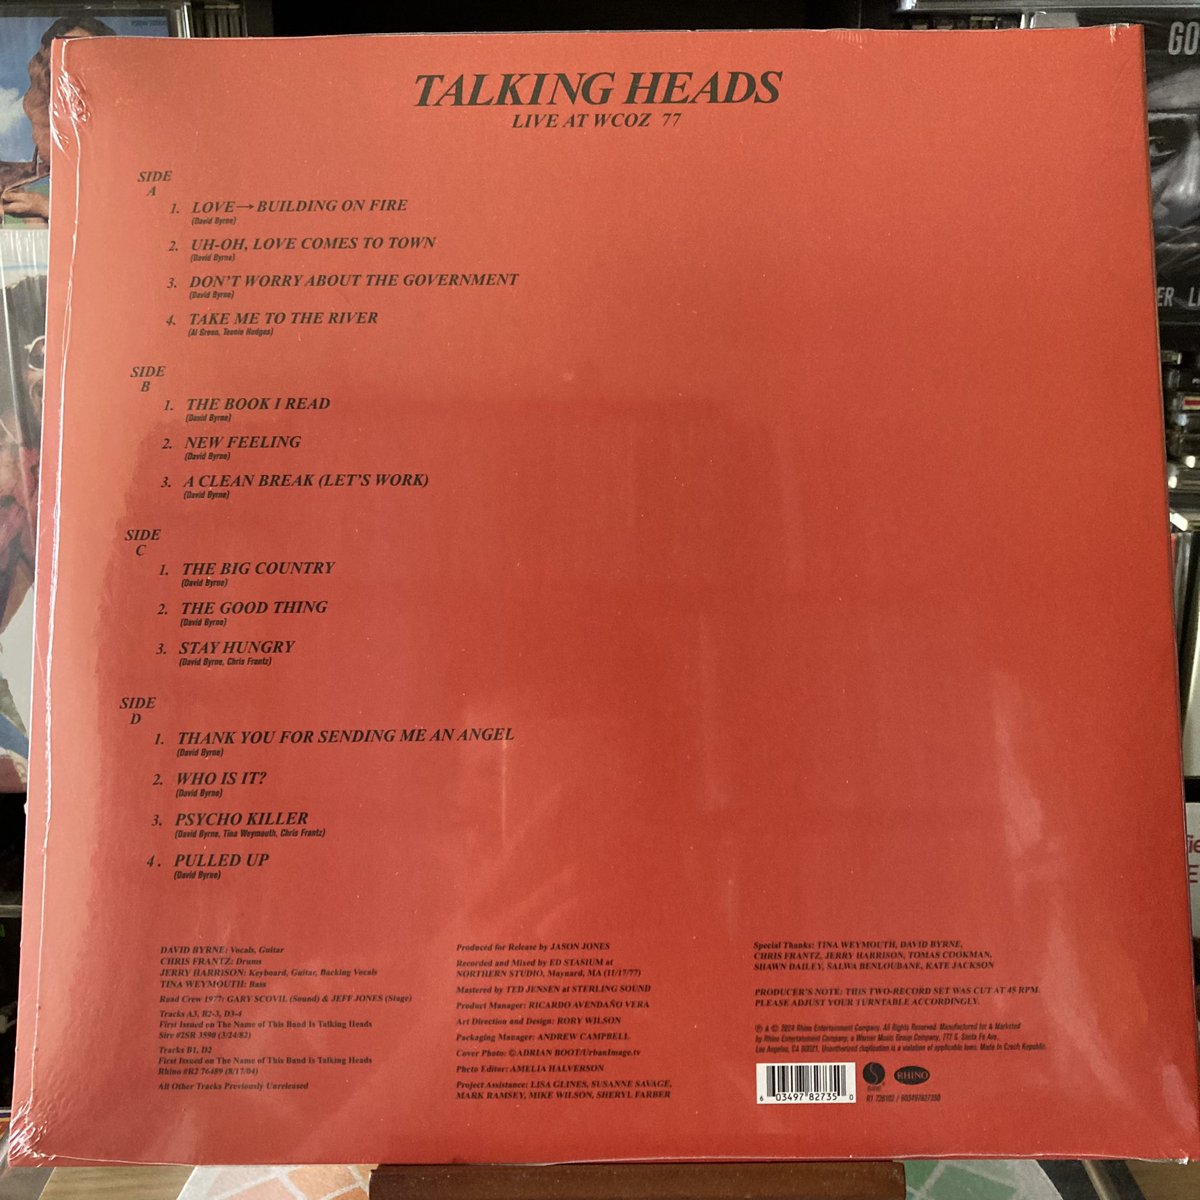 Talking Heads/Live At WCOZ 77
#nowplaying 
#vinyl #records #recordcollection
#cds #cdcollection
#talkingheads 
#rsd2024